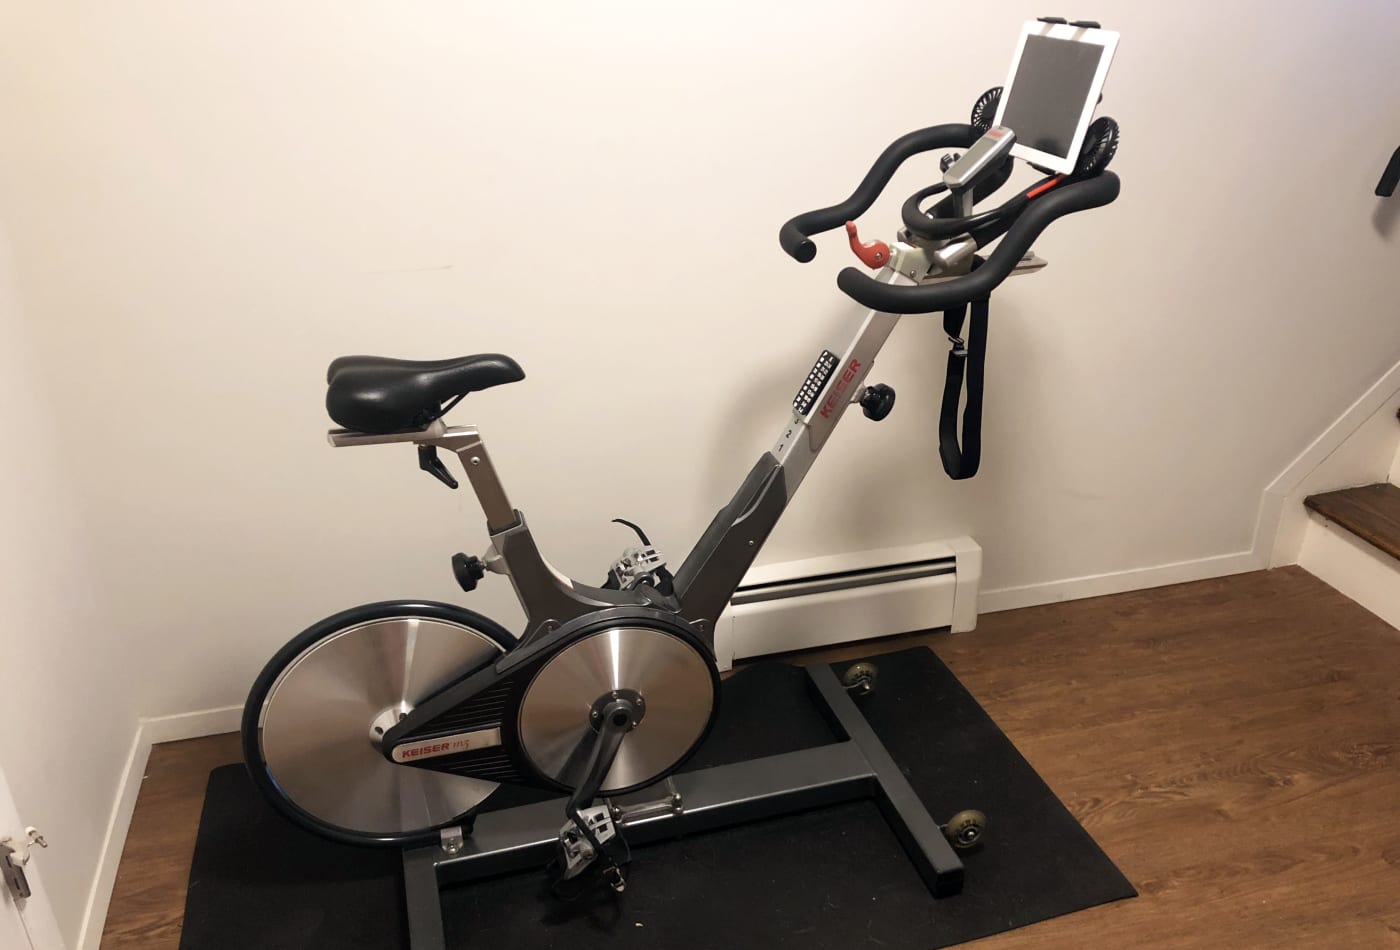 How To Find A Less Expensive Alternative For A Peloton Bike